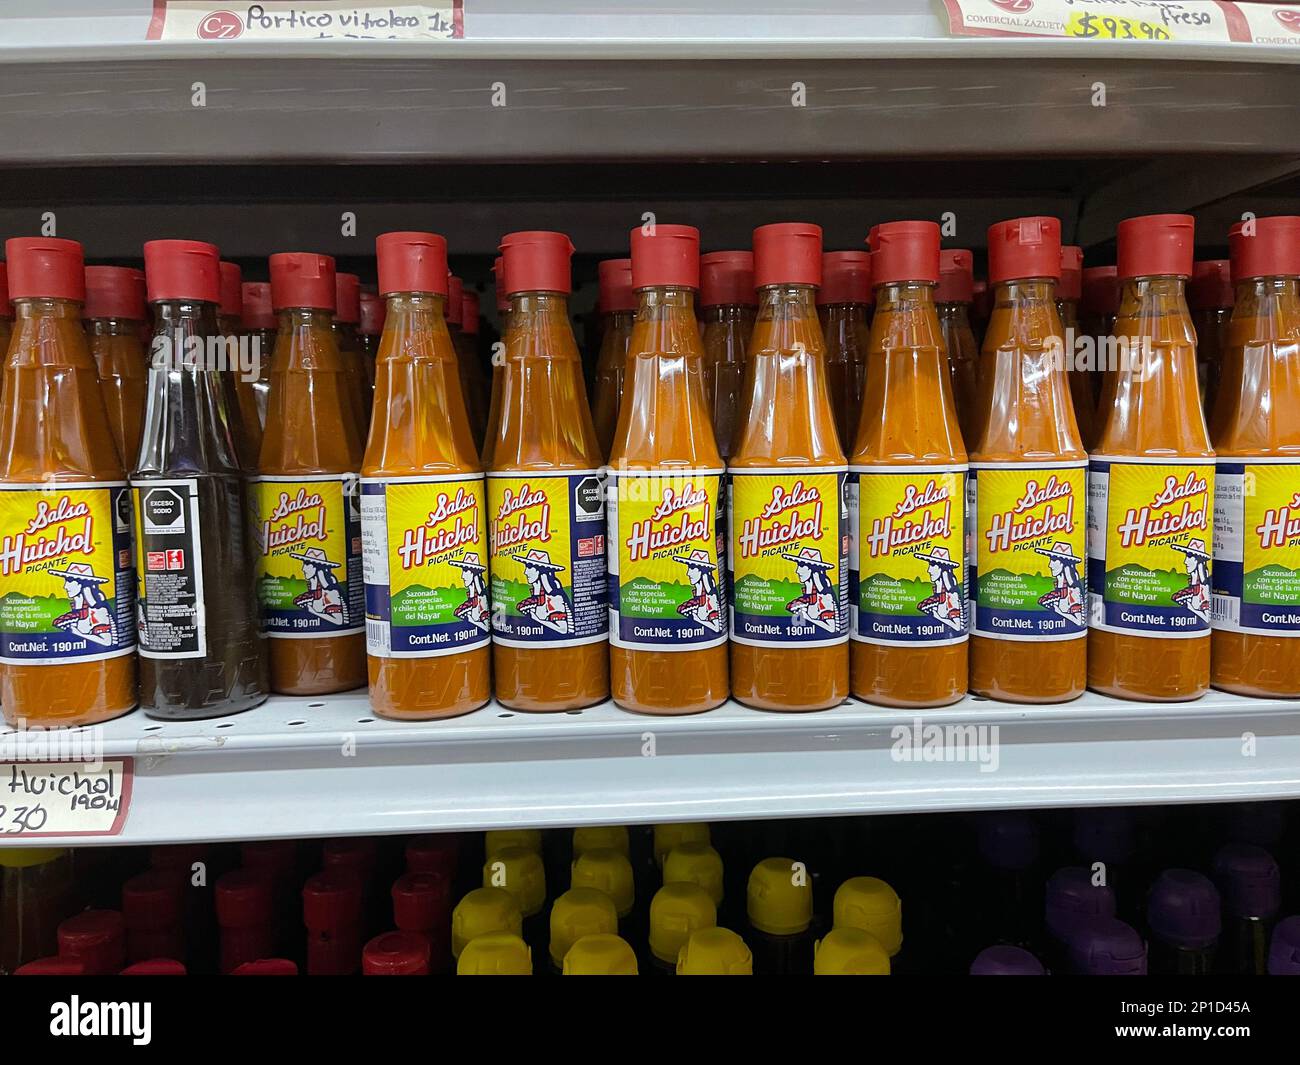 https://c8.alamy.com/comp/2P1D45A/bottled-sauces-for-sale-on-shelves-at-the-municipal-market-in-the-shopping-quarter-of-hermosillo-mexico-2P1D45A.jpg